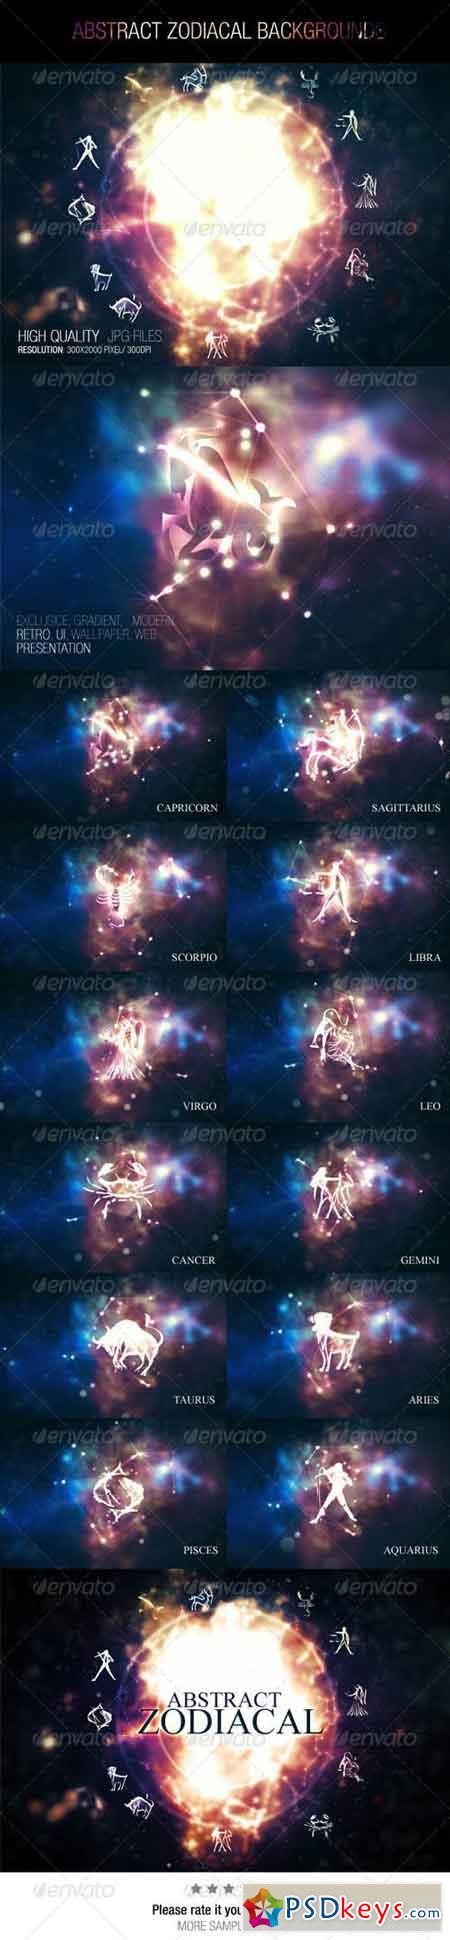 Abstract Zodiacal Backgrounds 7767663